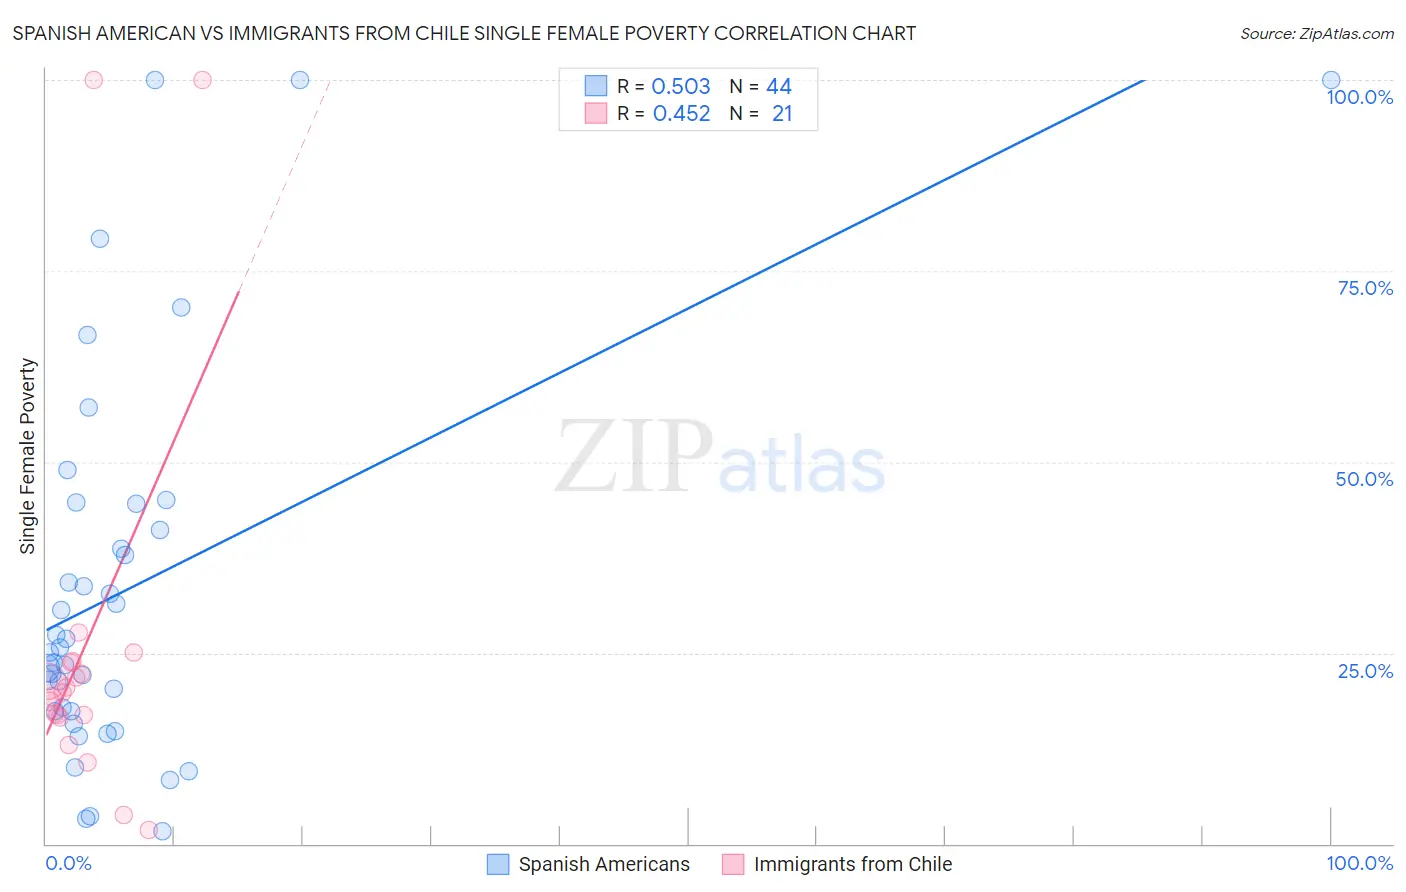 Spanish American vs Immigrants from Chile Single Female Poverty